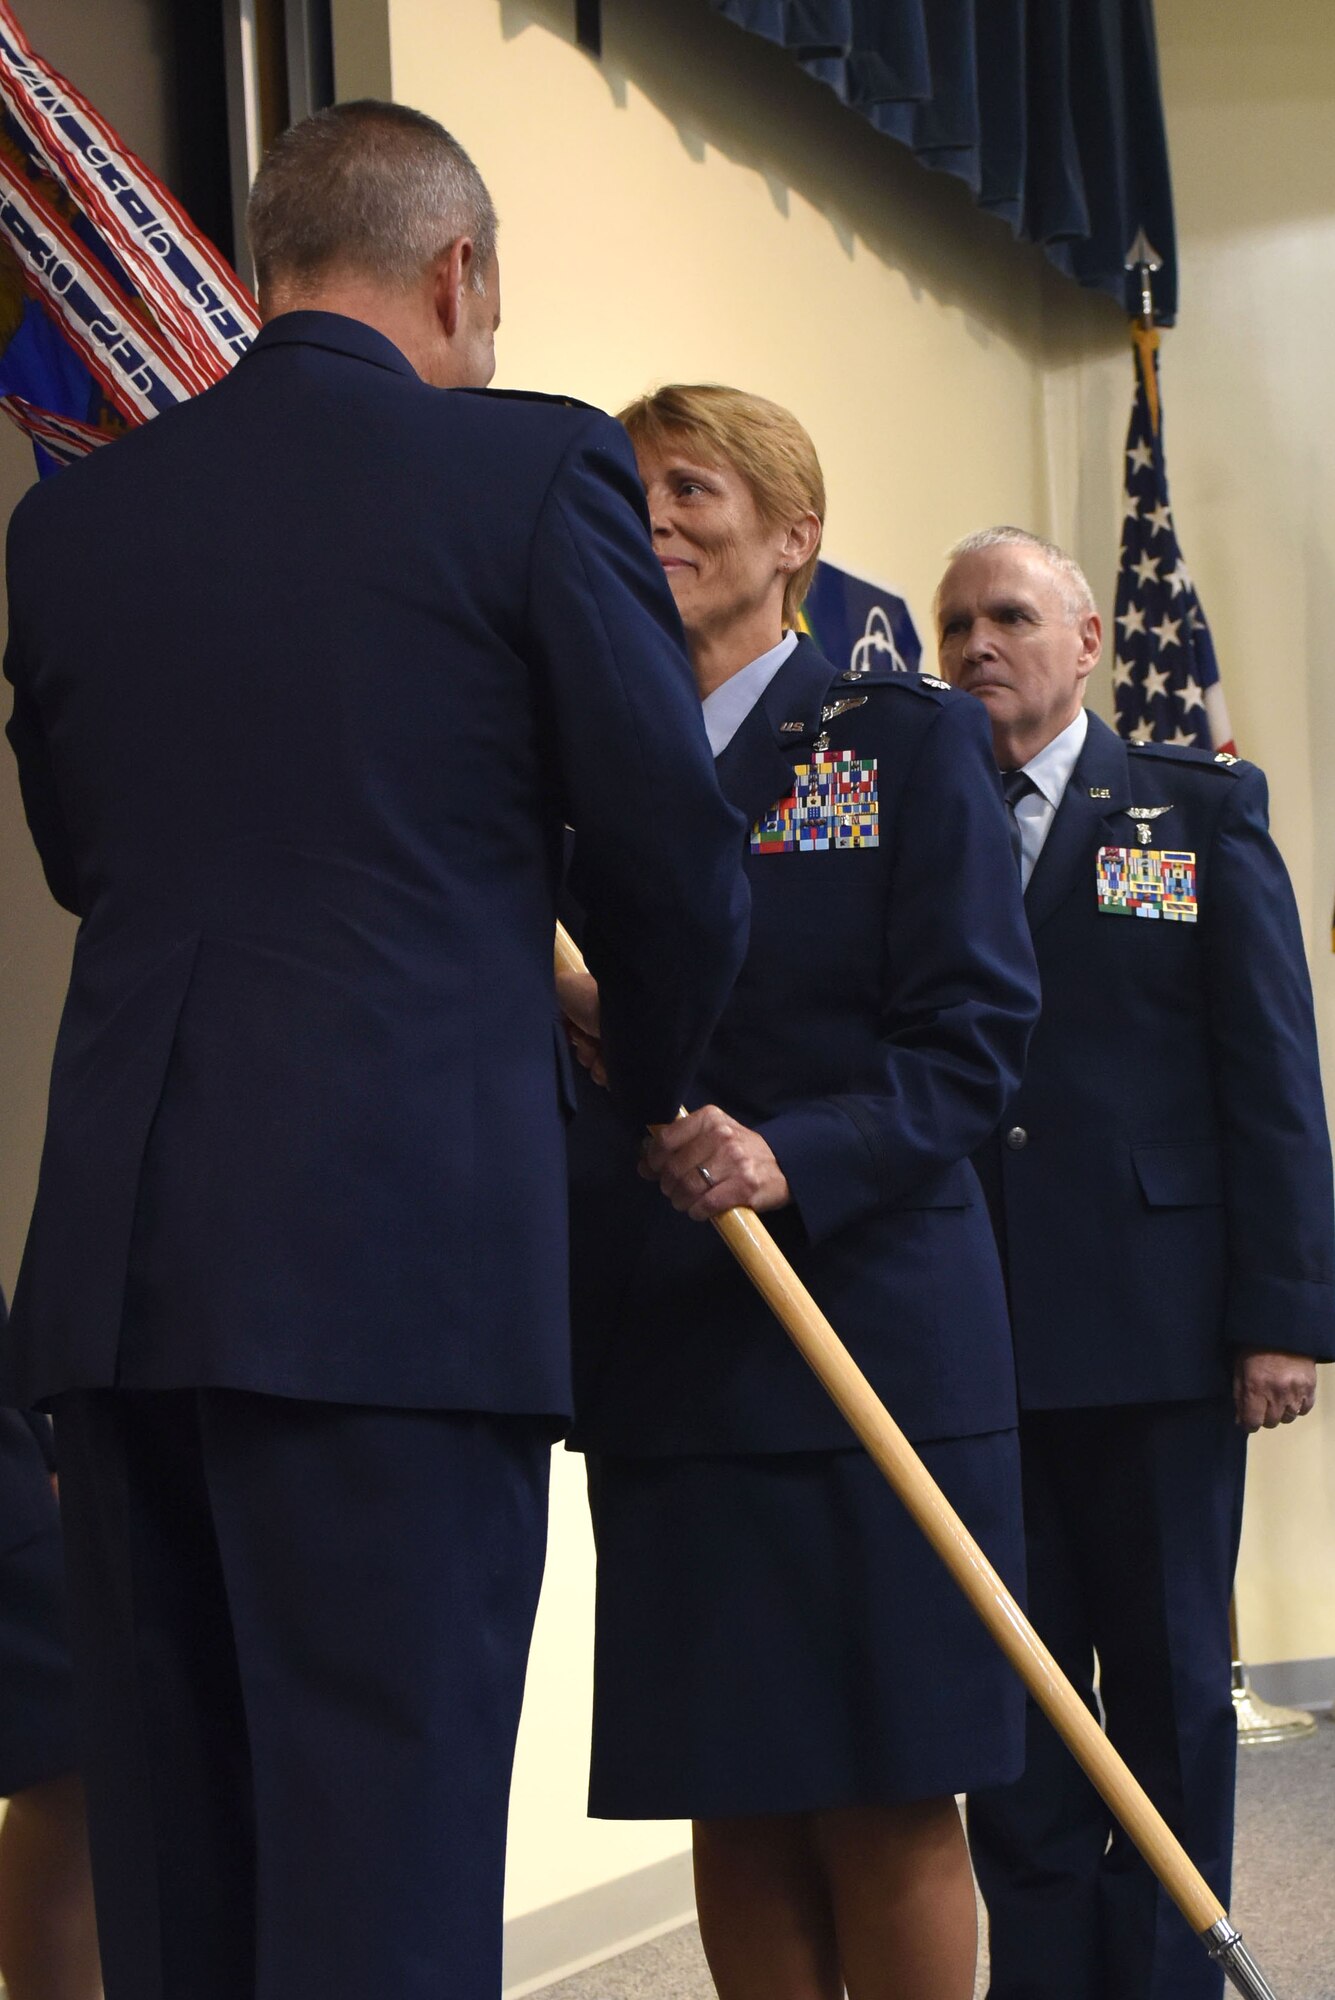 Lt. Col. Julie Carpenter (center), the new 193rd Special Operations Medical Group commander, accepts the guidon from Col. Mike Cason, 193rd Special Operations Wing commander, during a change-of-command ceremony Aug. 14 at Middletown, Pennsylvania. Carpenter succeeds Col. David Gann (right), who retired from the position and the Air National Guard. The ceremony began with preliminary honors and ended with the symbolic passing of the guidon. (U.S. Air National Guard photo by Airman 1st Class Julia Sorber/Released) 